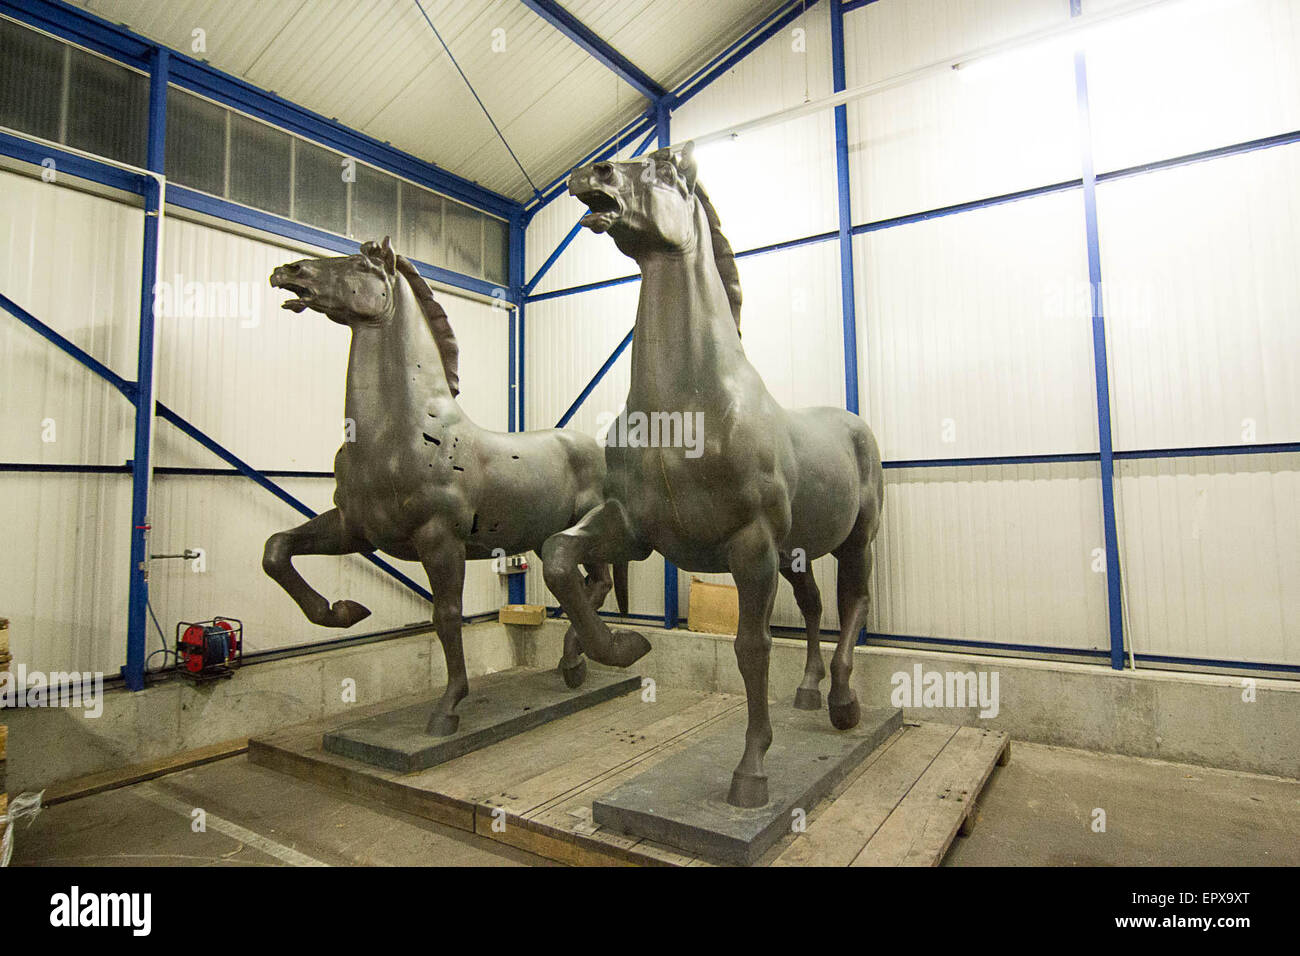 HANDOUT - a handout picture made available on 22 May 2015 shows the sculptures 'Schreitende Pferde' (lit. pacing horses) by Josef Thorak in a hangar in the compound of the federal police in Bad Bergzabern, Germany, 22 May 2015. Sculptures, once intended for Adolf Hitler's Neue Reichskanzlei (lit. new Chancellery of the Reich) in Berlin, were seized in Bad Duerkheim following investigations lasting several years. Photo: Polizei/dpa/MANDATORY CREDITS) Stock Photo